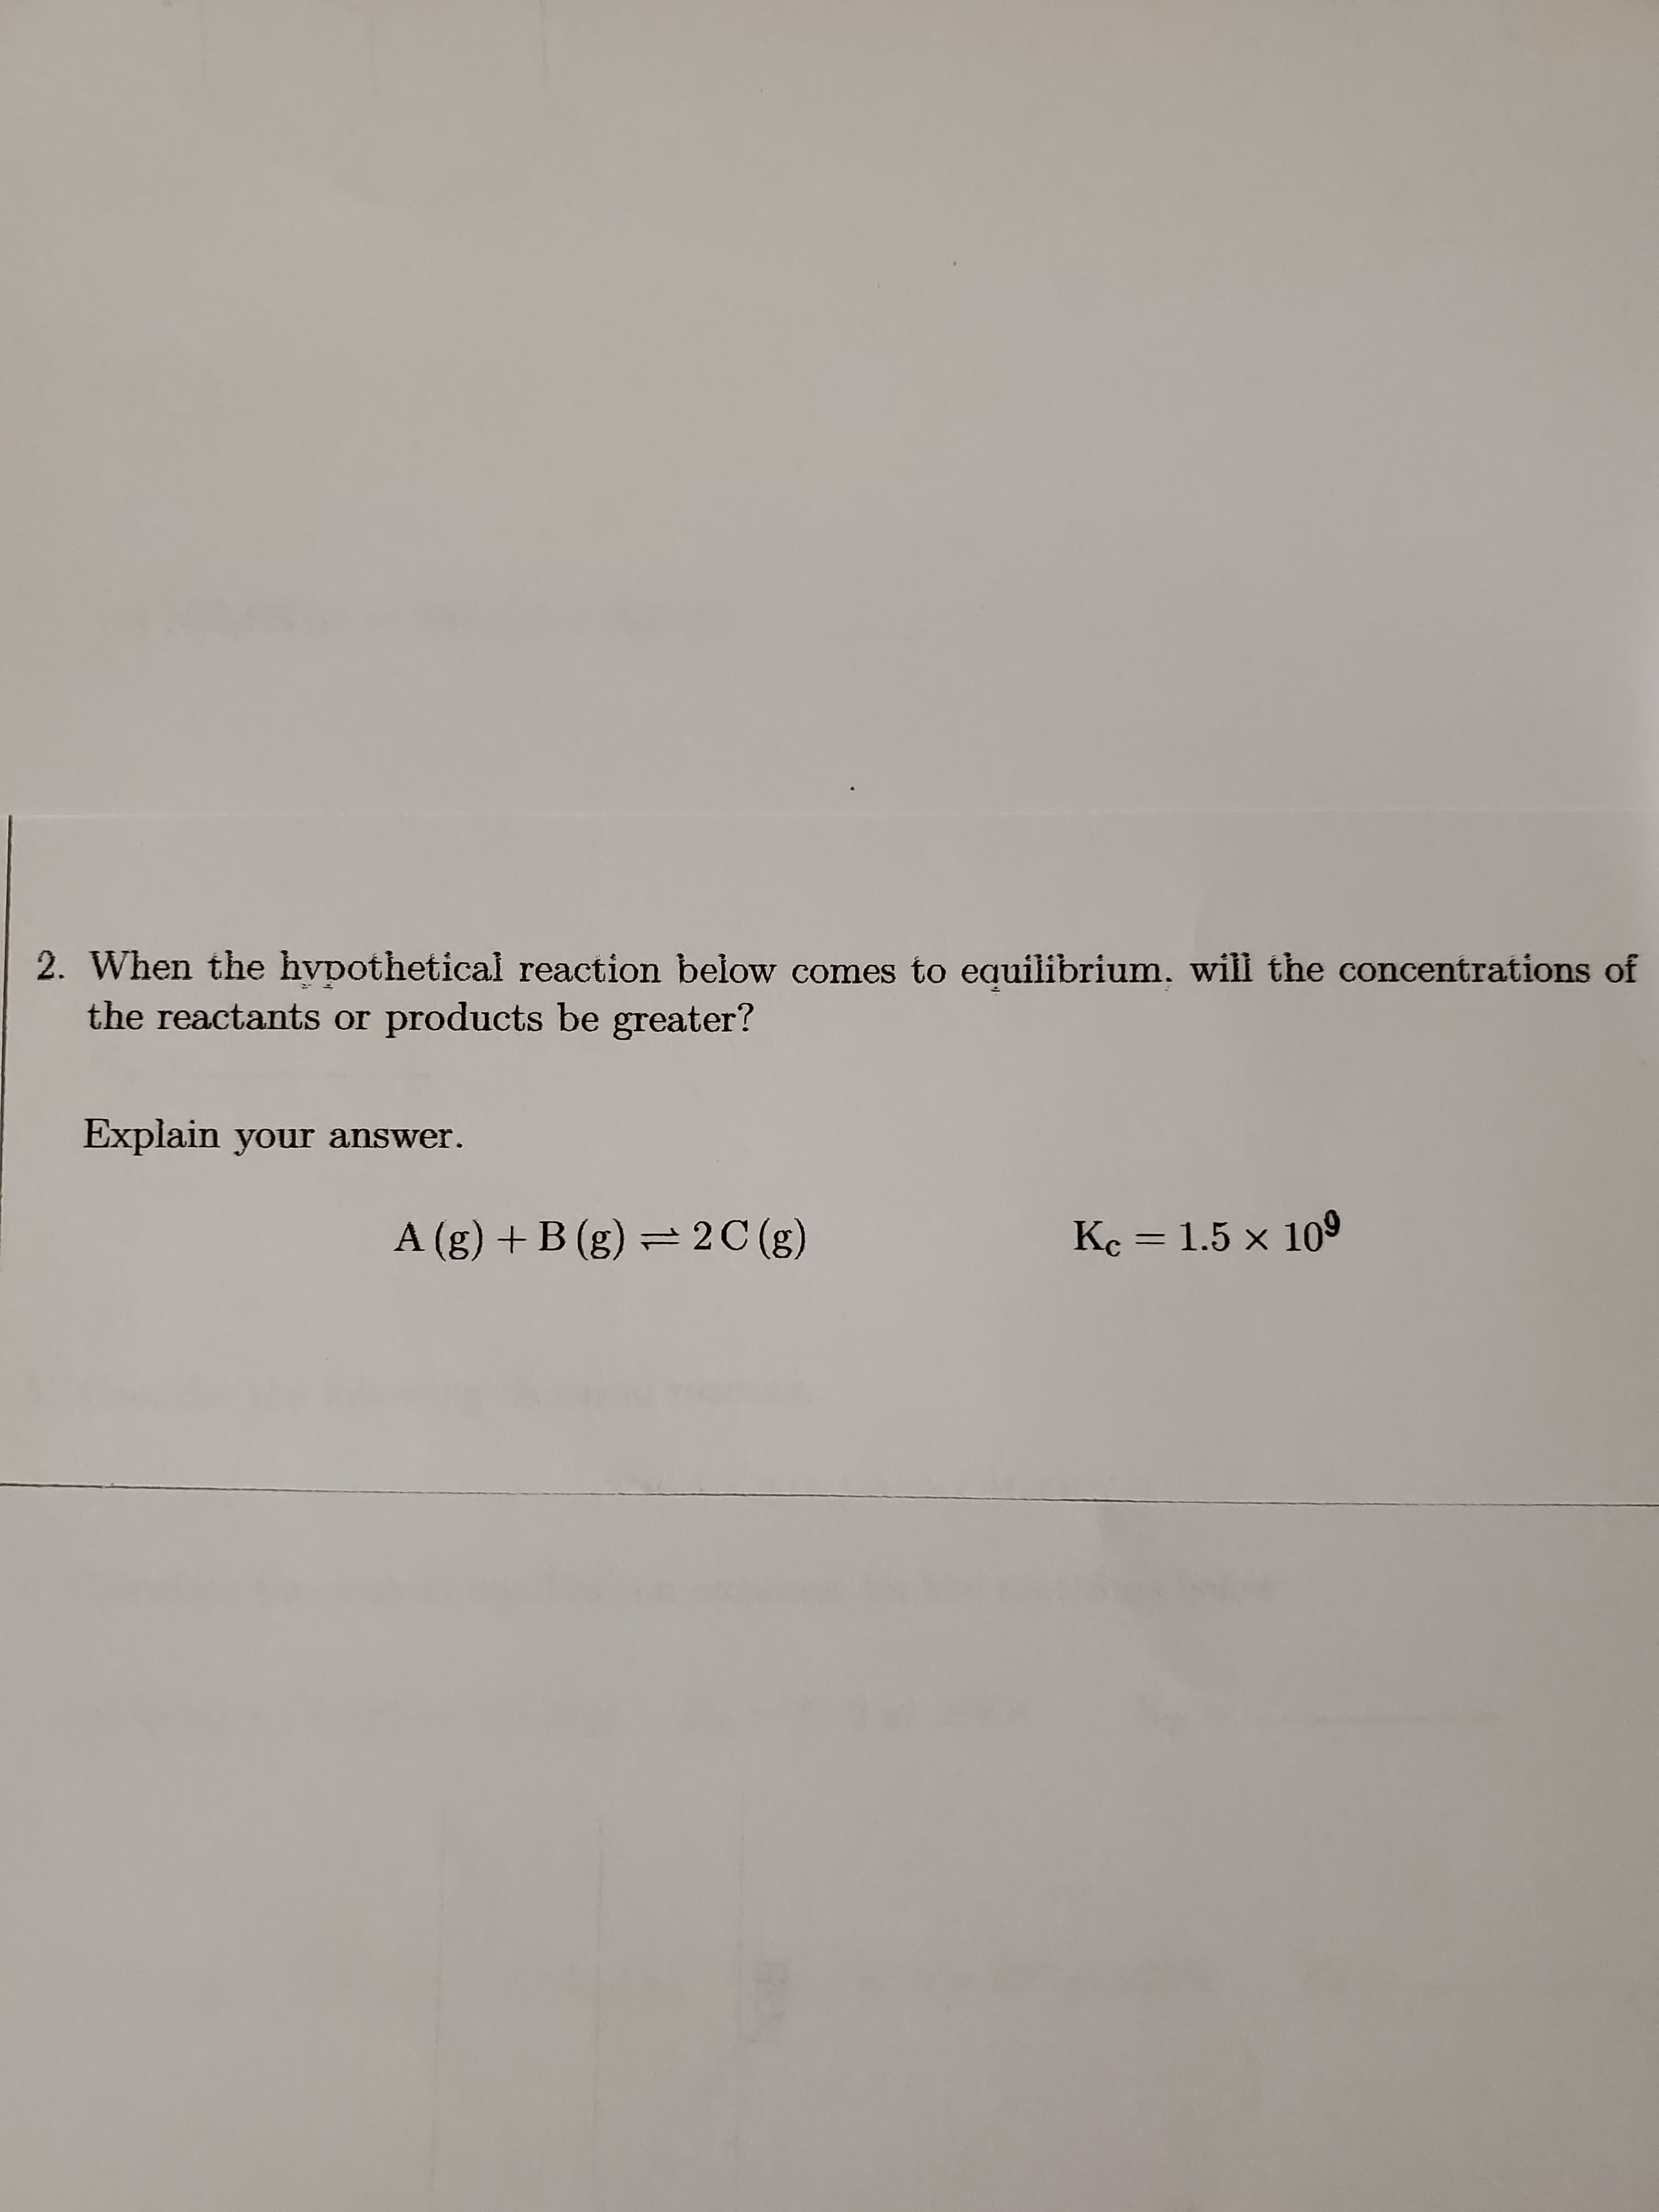 2. When the hvpothetical reaction below comes to equilibrium, will the concentrations of
the reactants or products be greater?
Explain your answer.
A (g) + B (g) = 2 C (g)
Ke = 1.5 × 109
